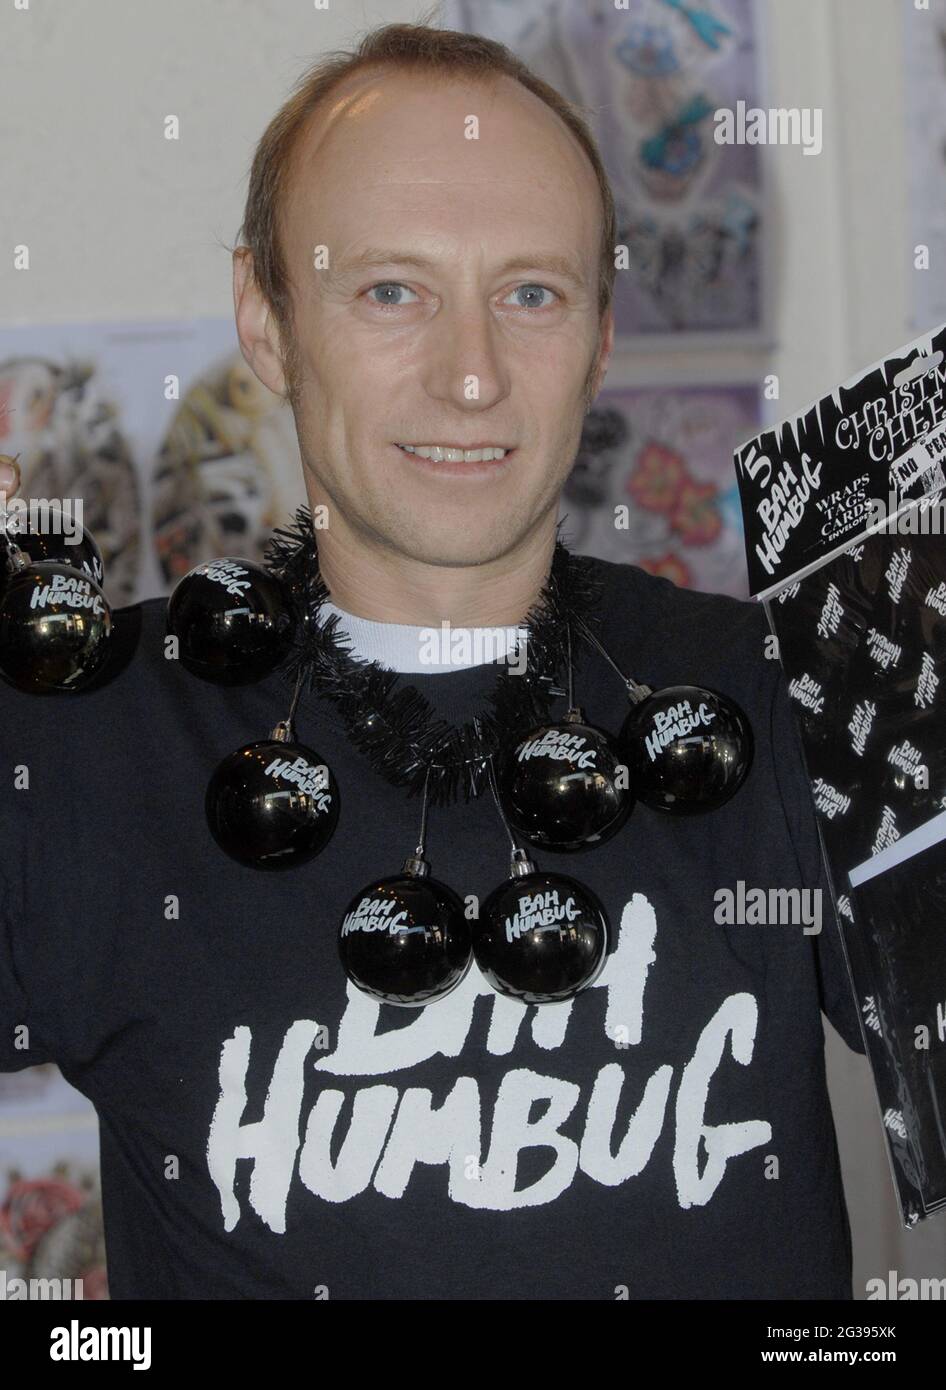 CLIVE WALTERS WITH HIS BAH HUMBUG CHRISTMAS DECORATIONS. PIC MIKE WALKER, 2006 Stock Photo